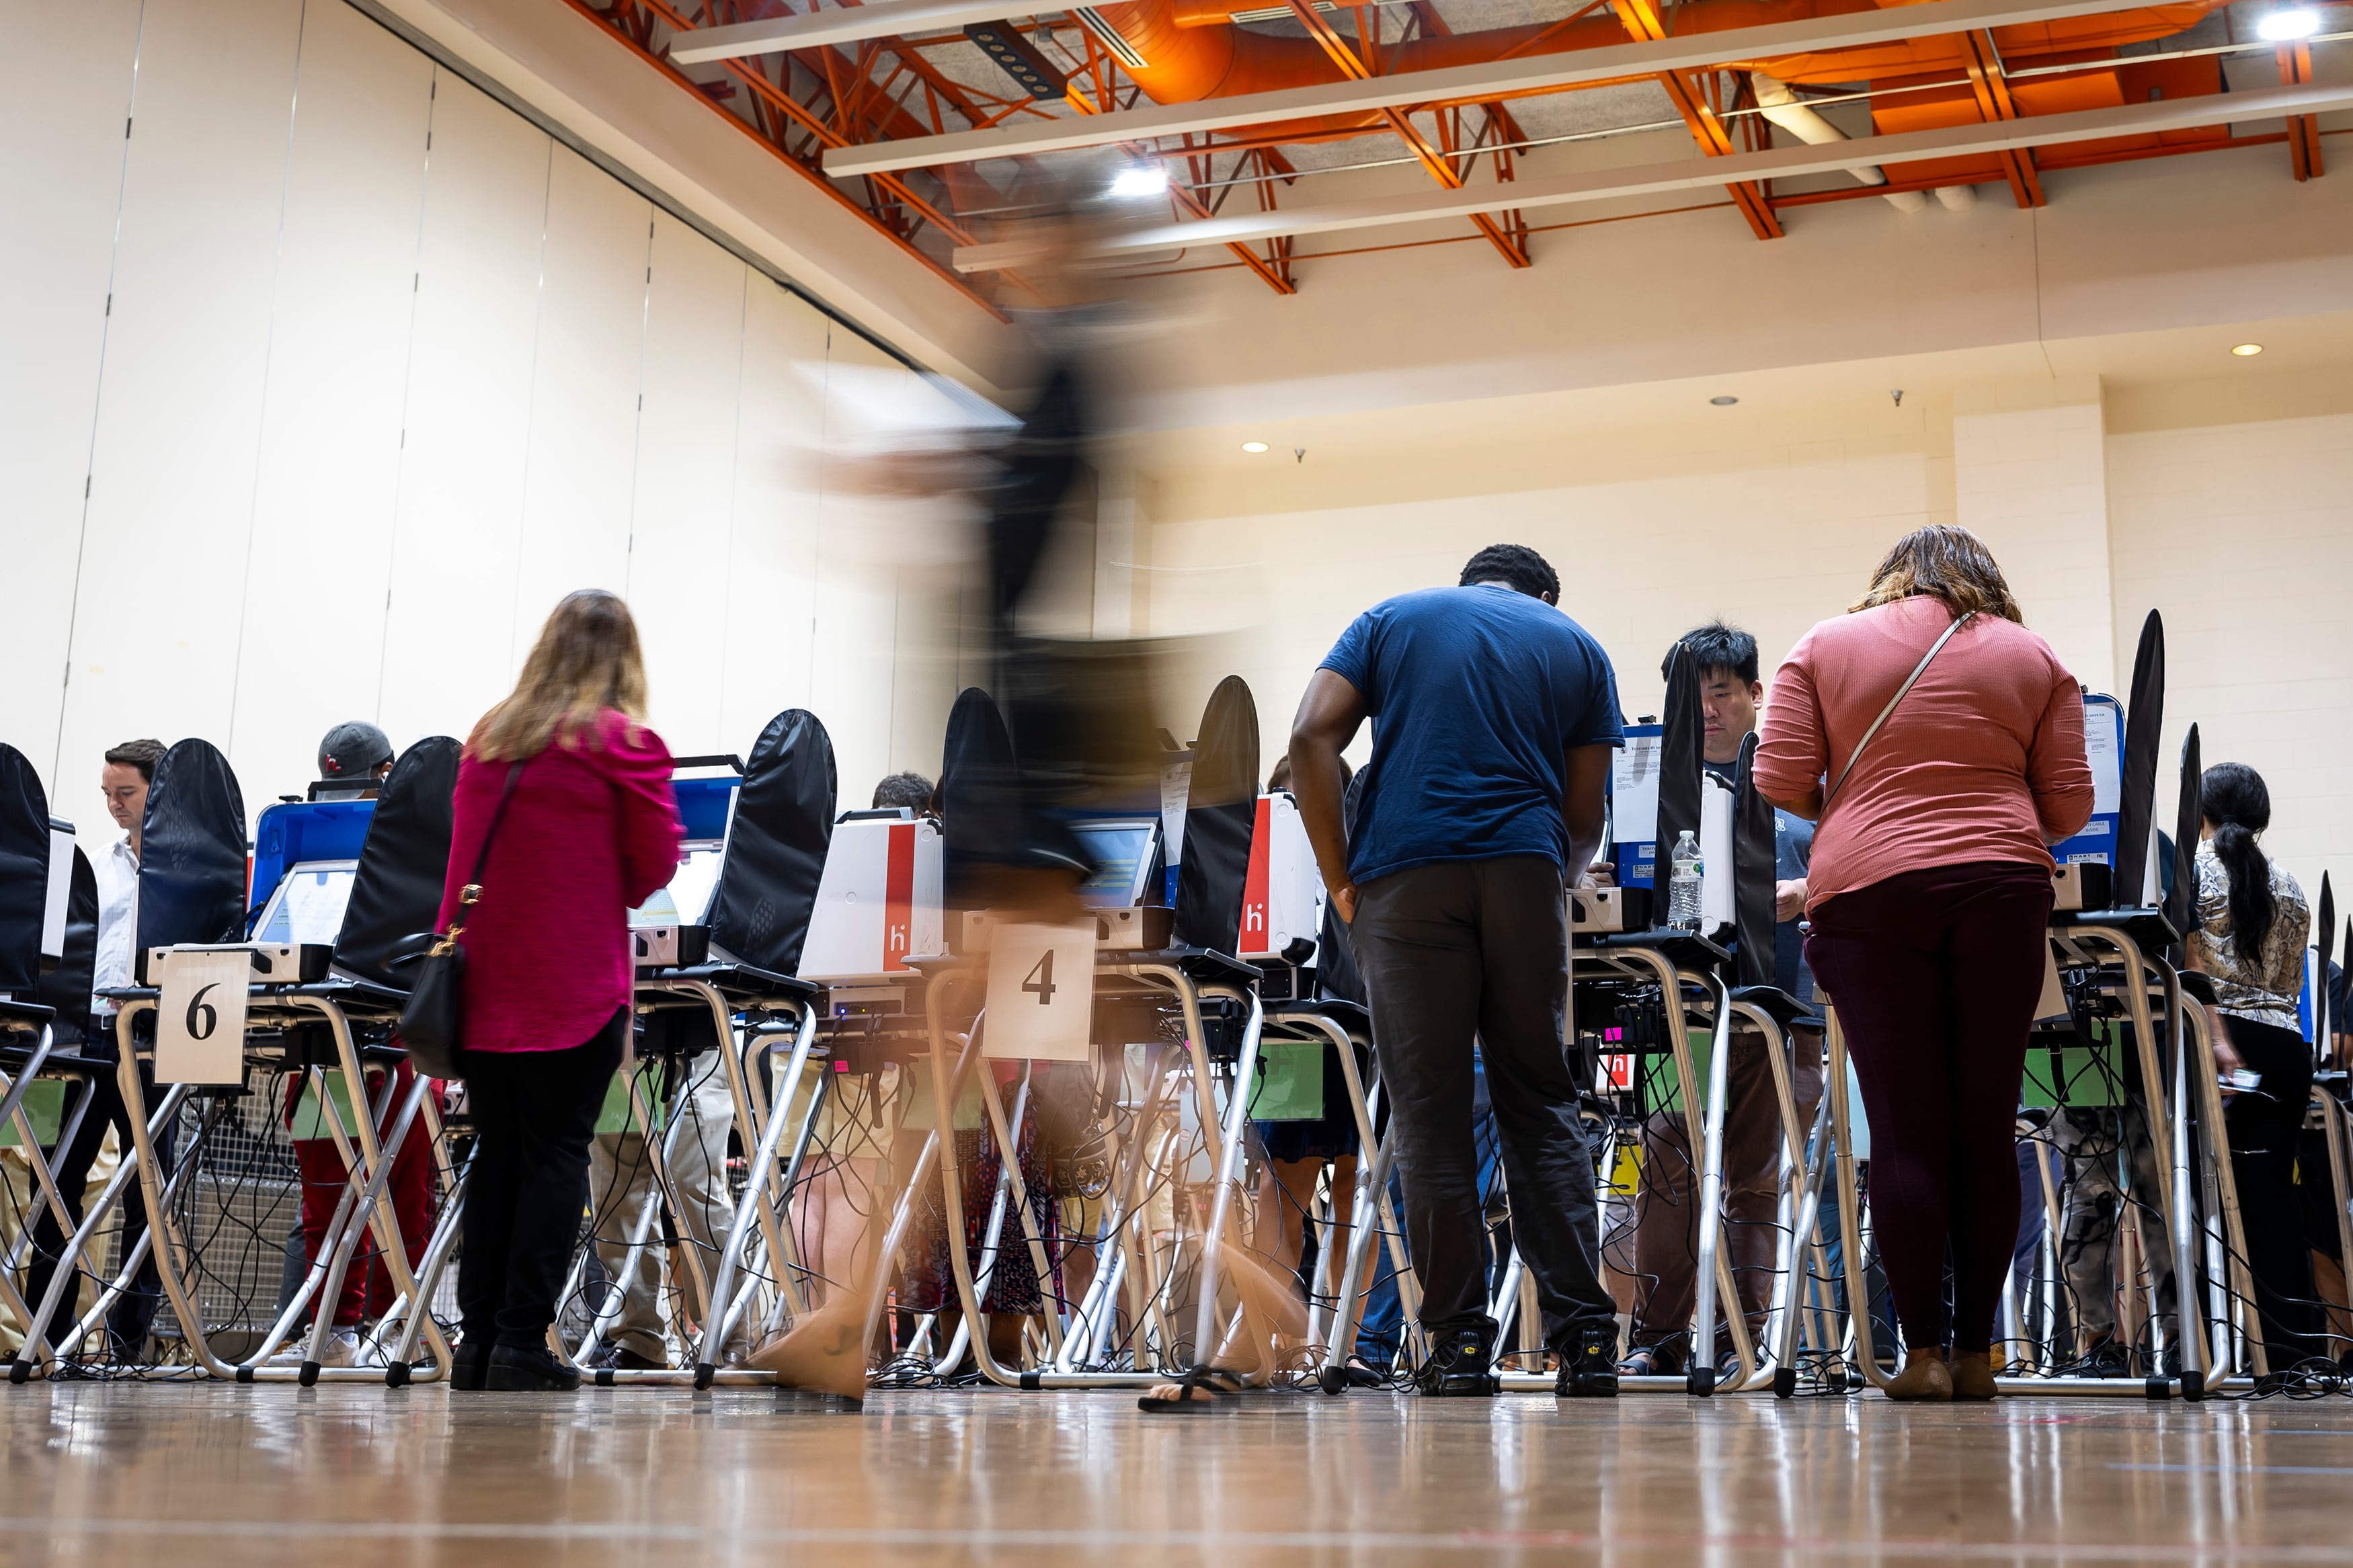 People stand while voting at booths in a room with a high ceiling.